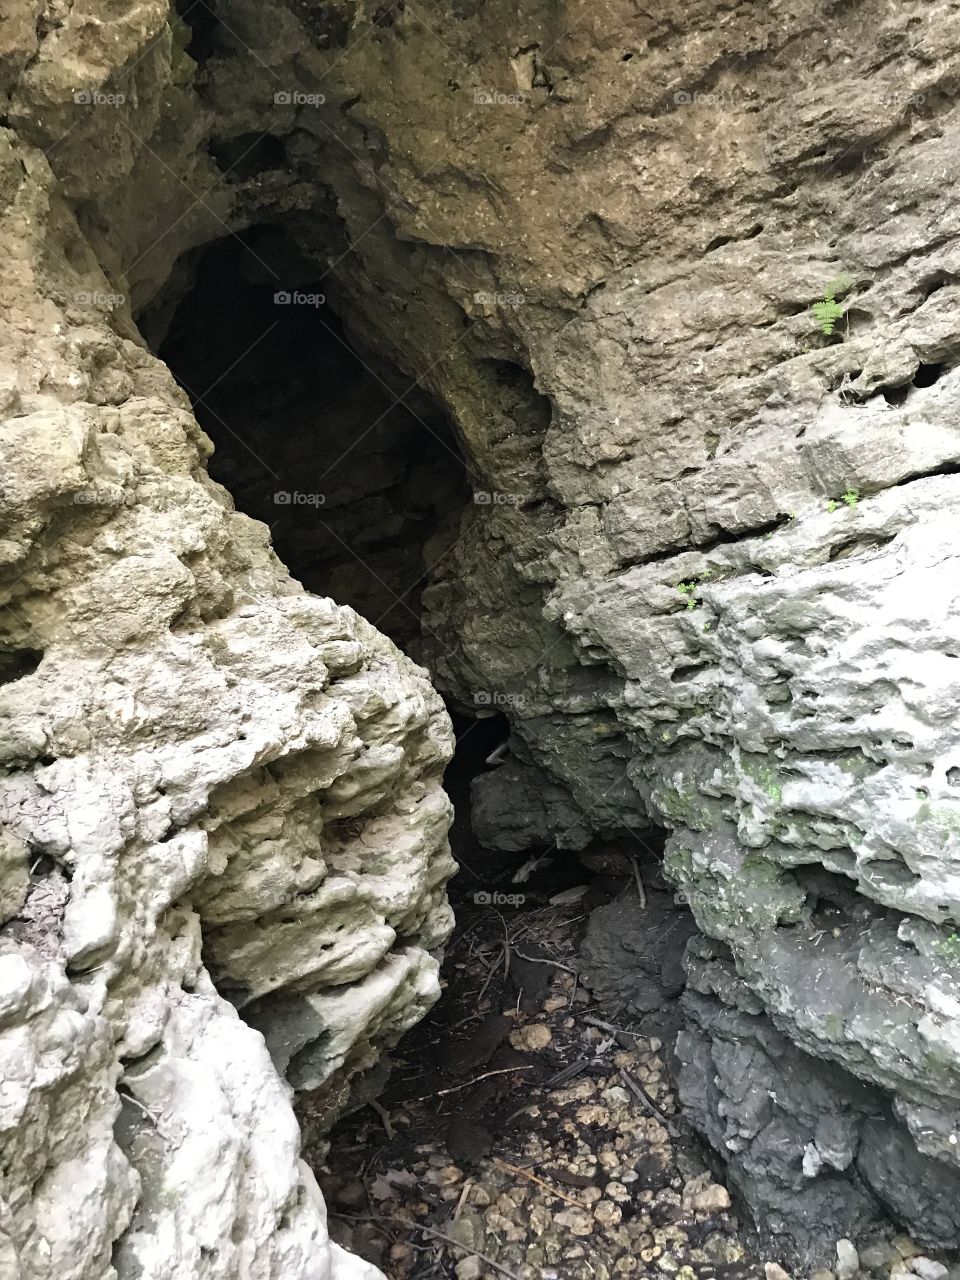 The mouth of one of the larger Indian Caves near Perry Farm and the Kankakee River in Kankakee, IL.